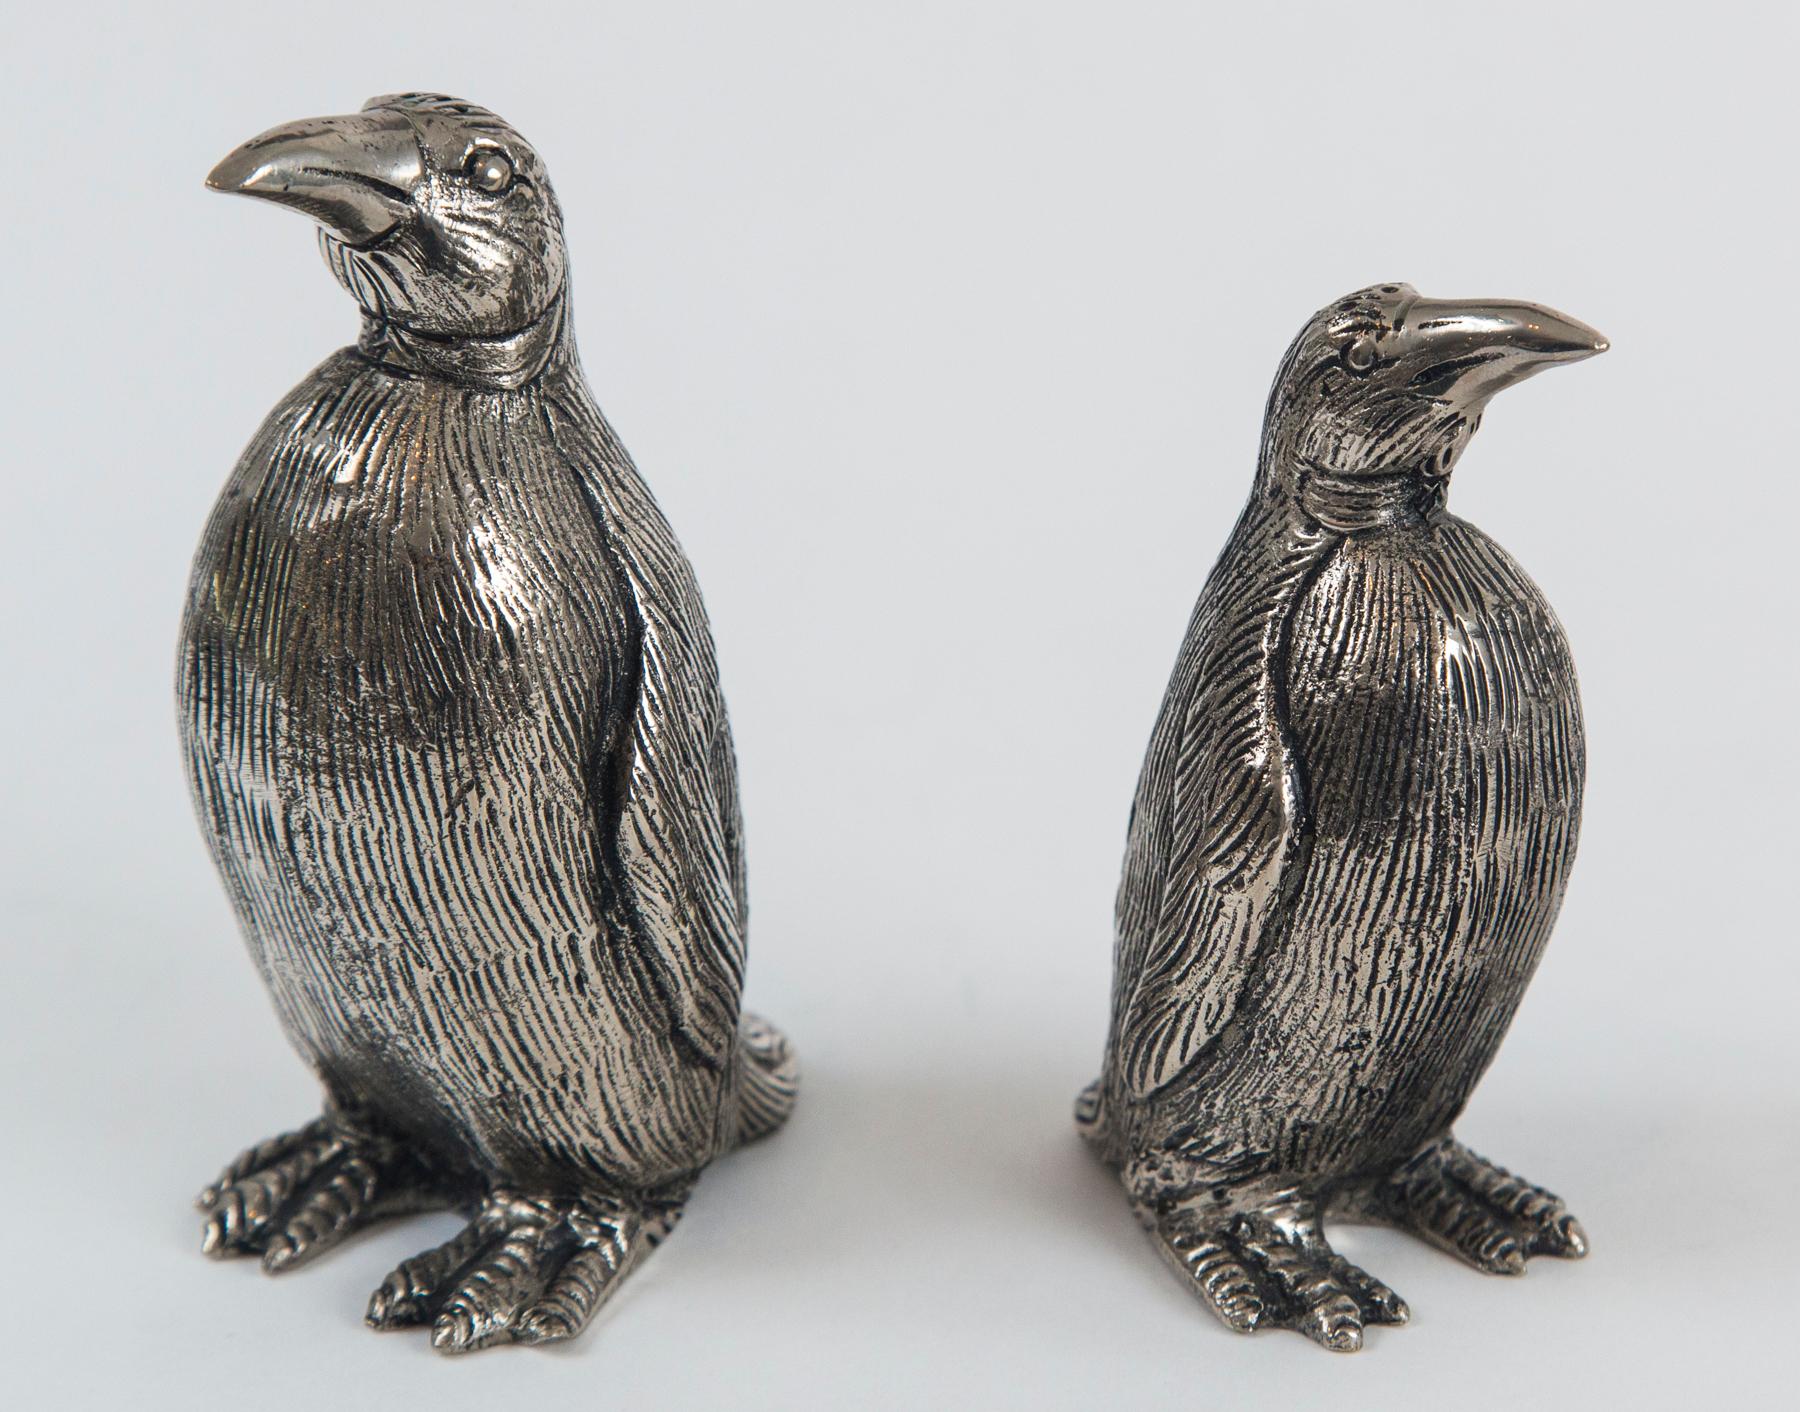 Gucci Penguin Salt and Pepper Shakers, Silver Plate Over Pewter 1